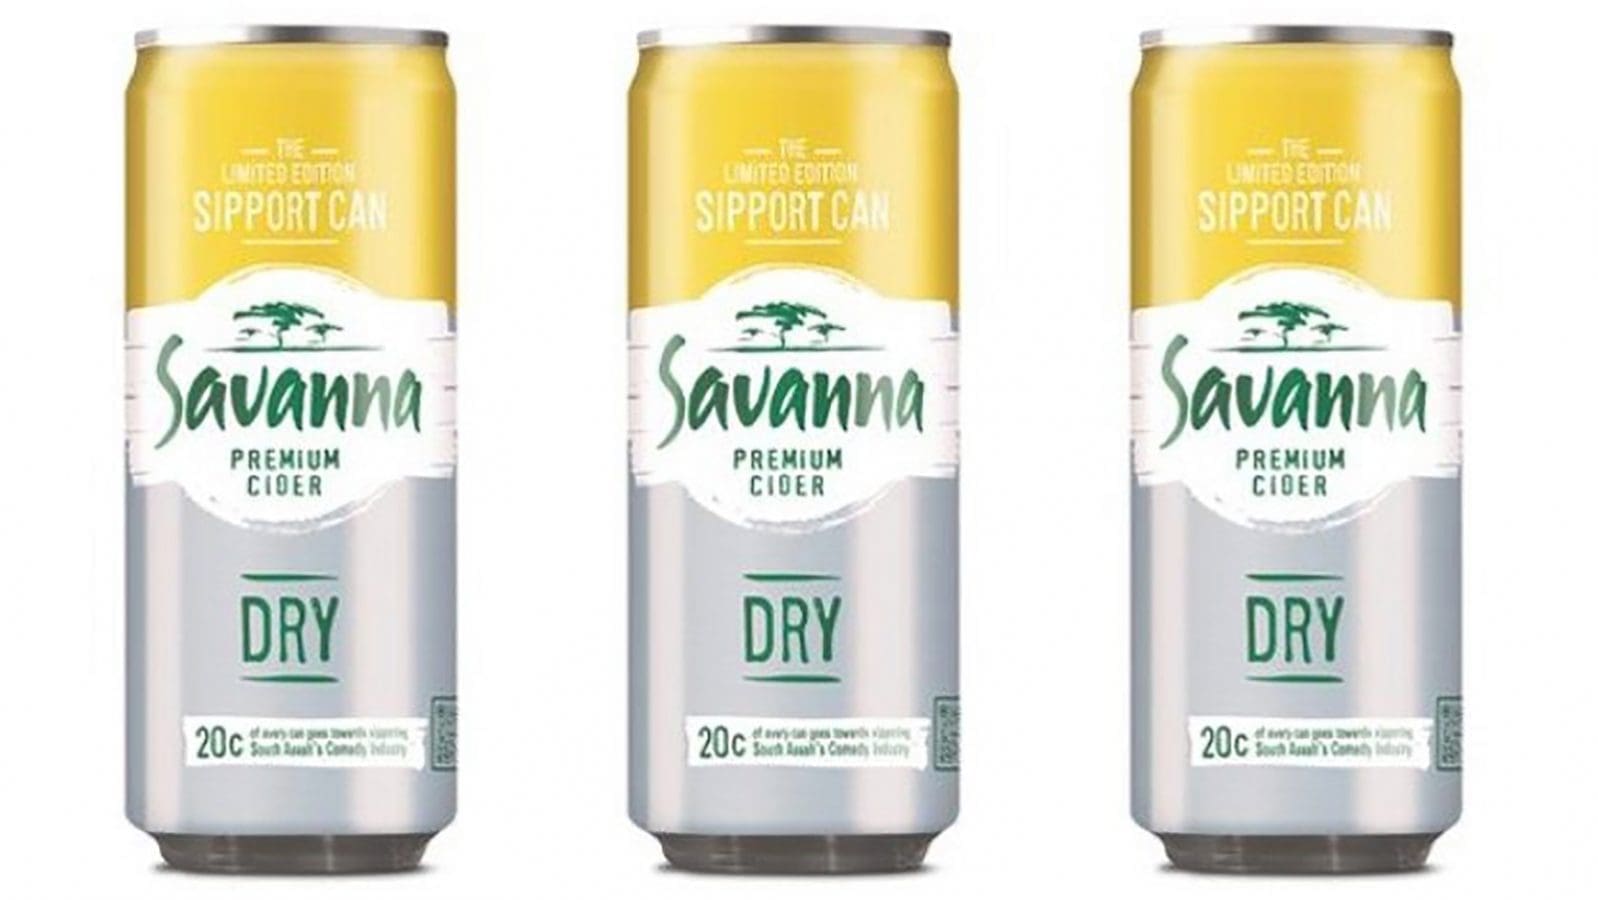 Distell introduces Savanna cider in cans due to glass shortage